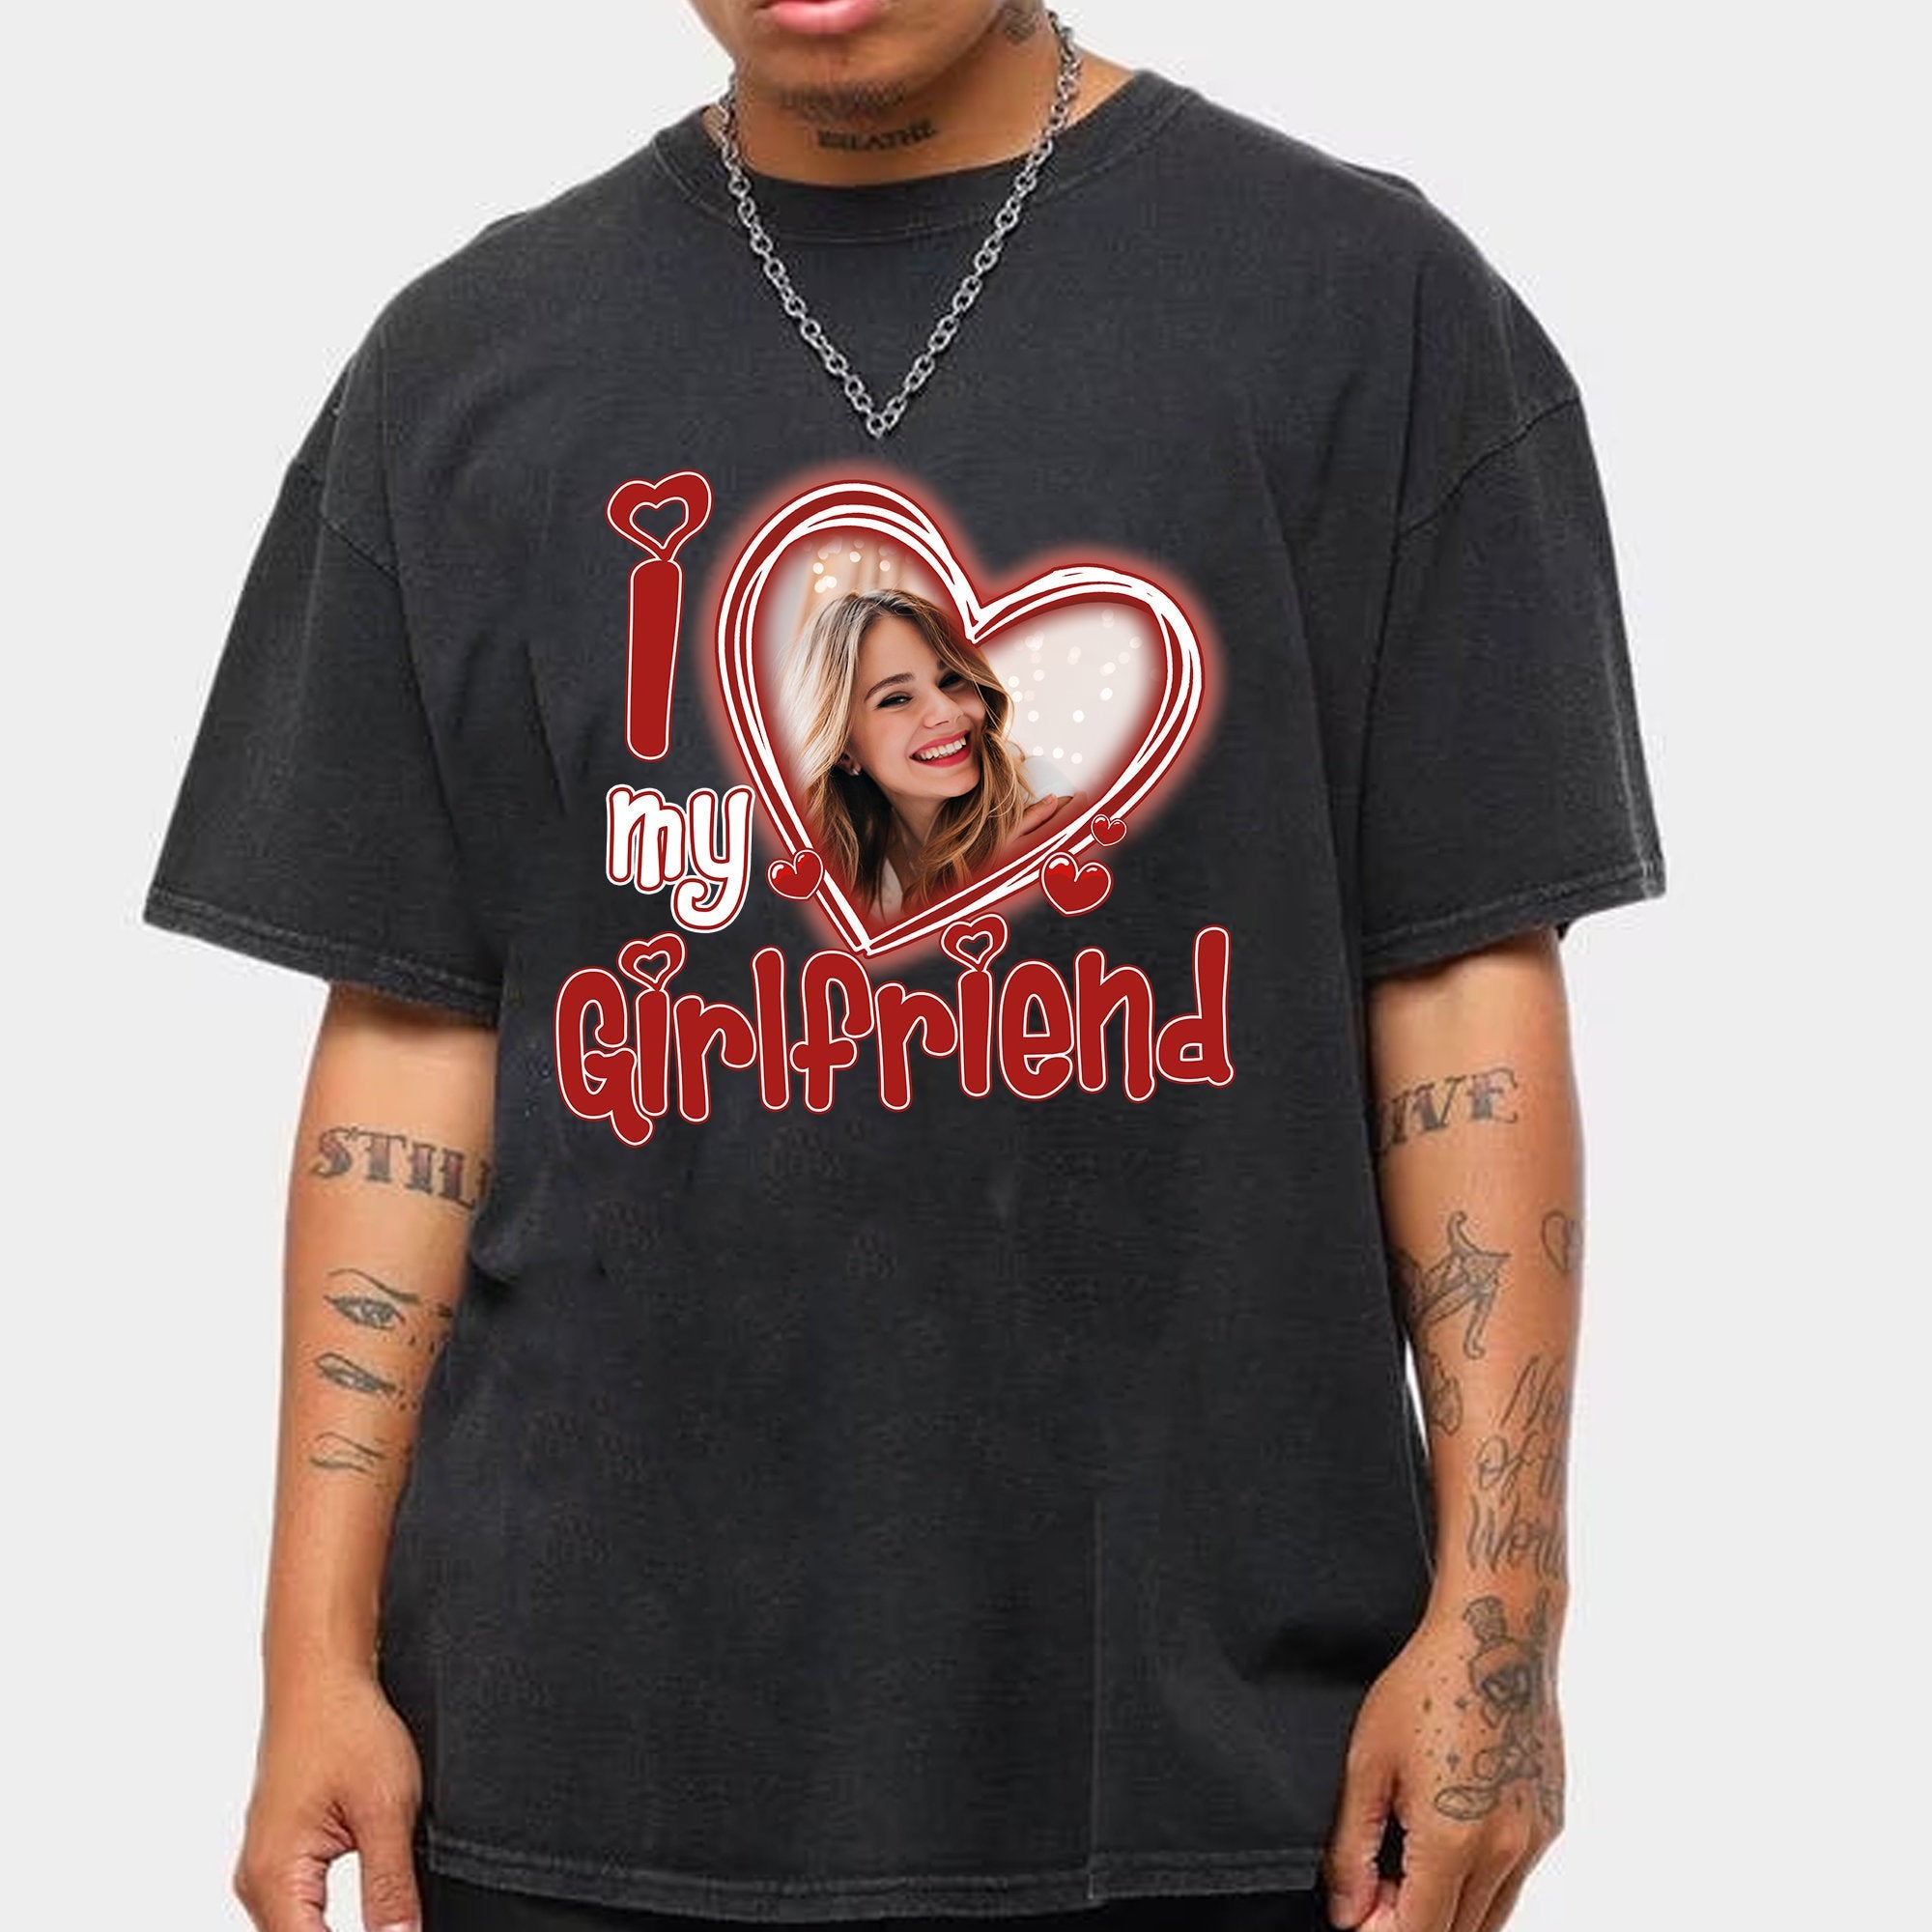 Express Your Love with a Custom Picture Shirt - 'I Love My Girlfriend' Edition